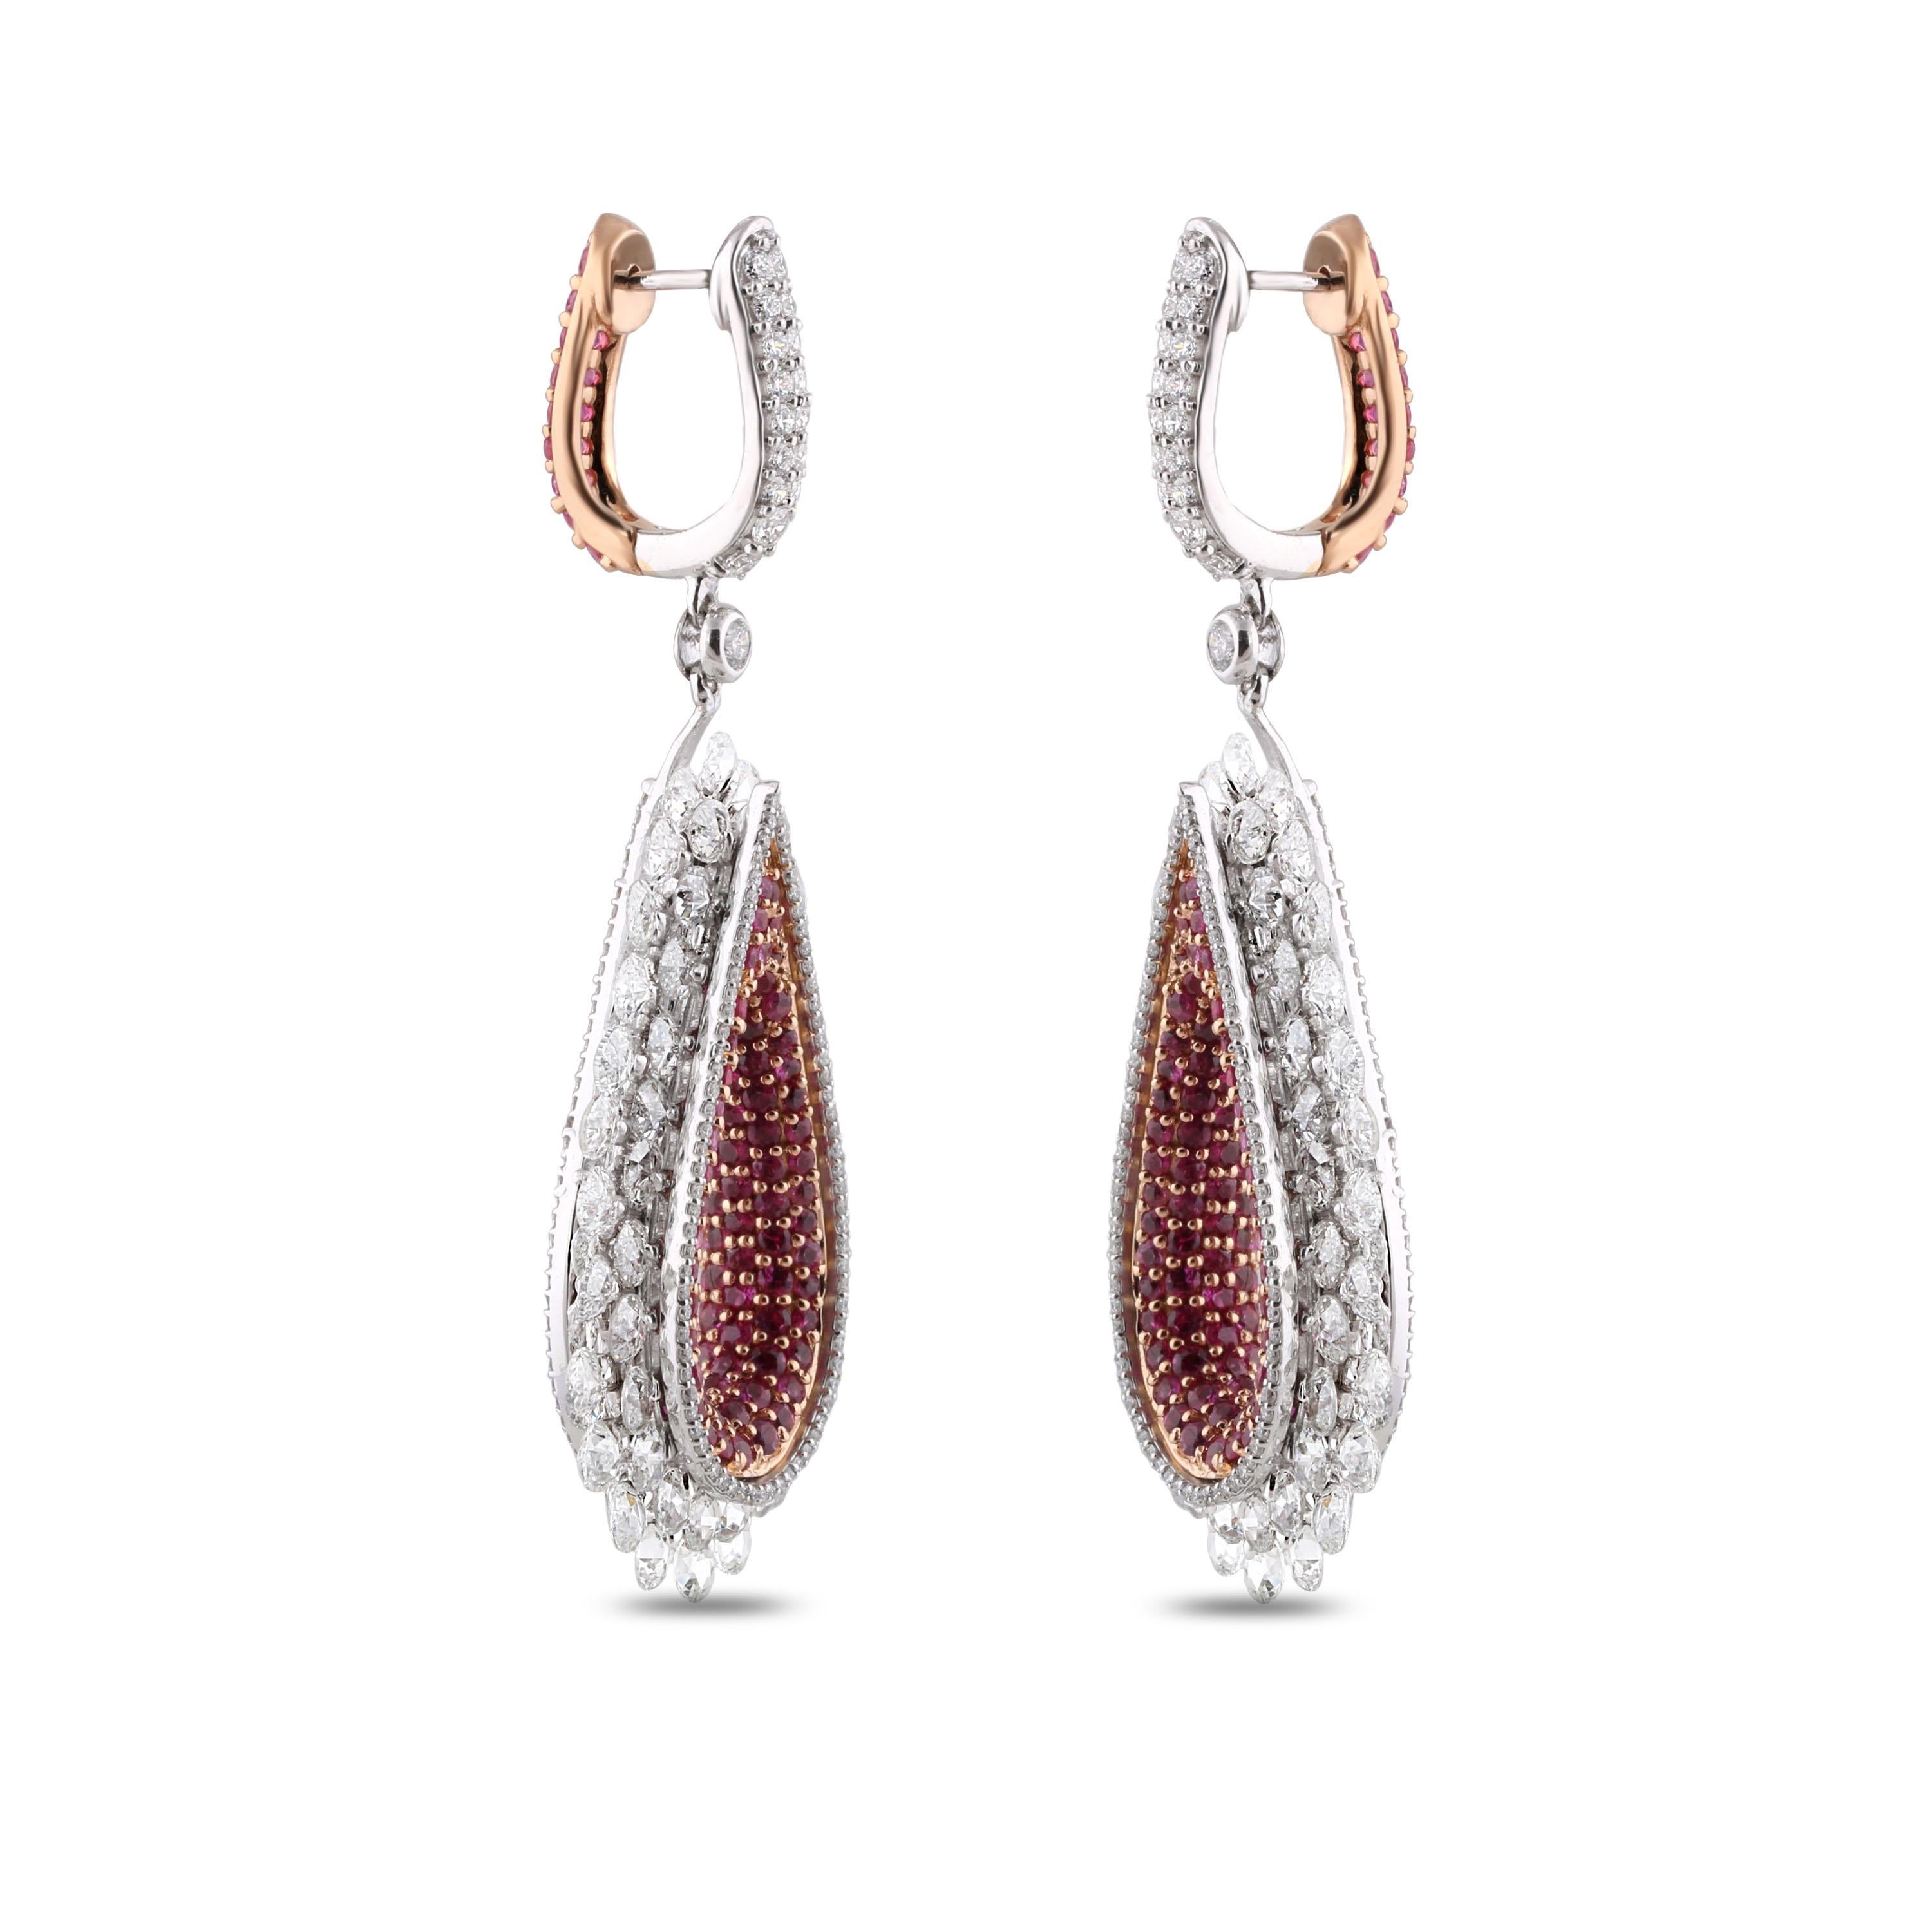 Contemporary Studio Rêves Diamond and Pink Sapphire Tear Drop Reversible Earrings in 18K Gold